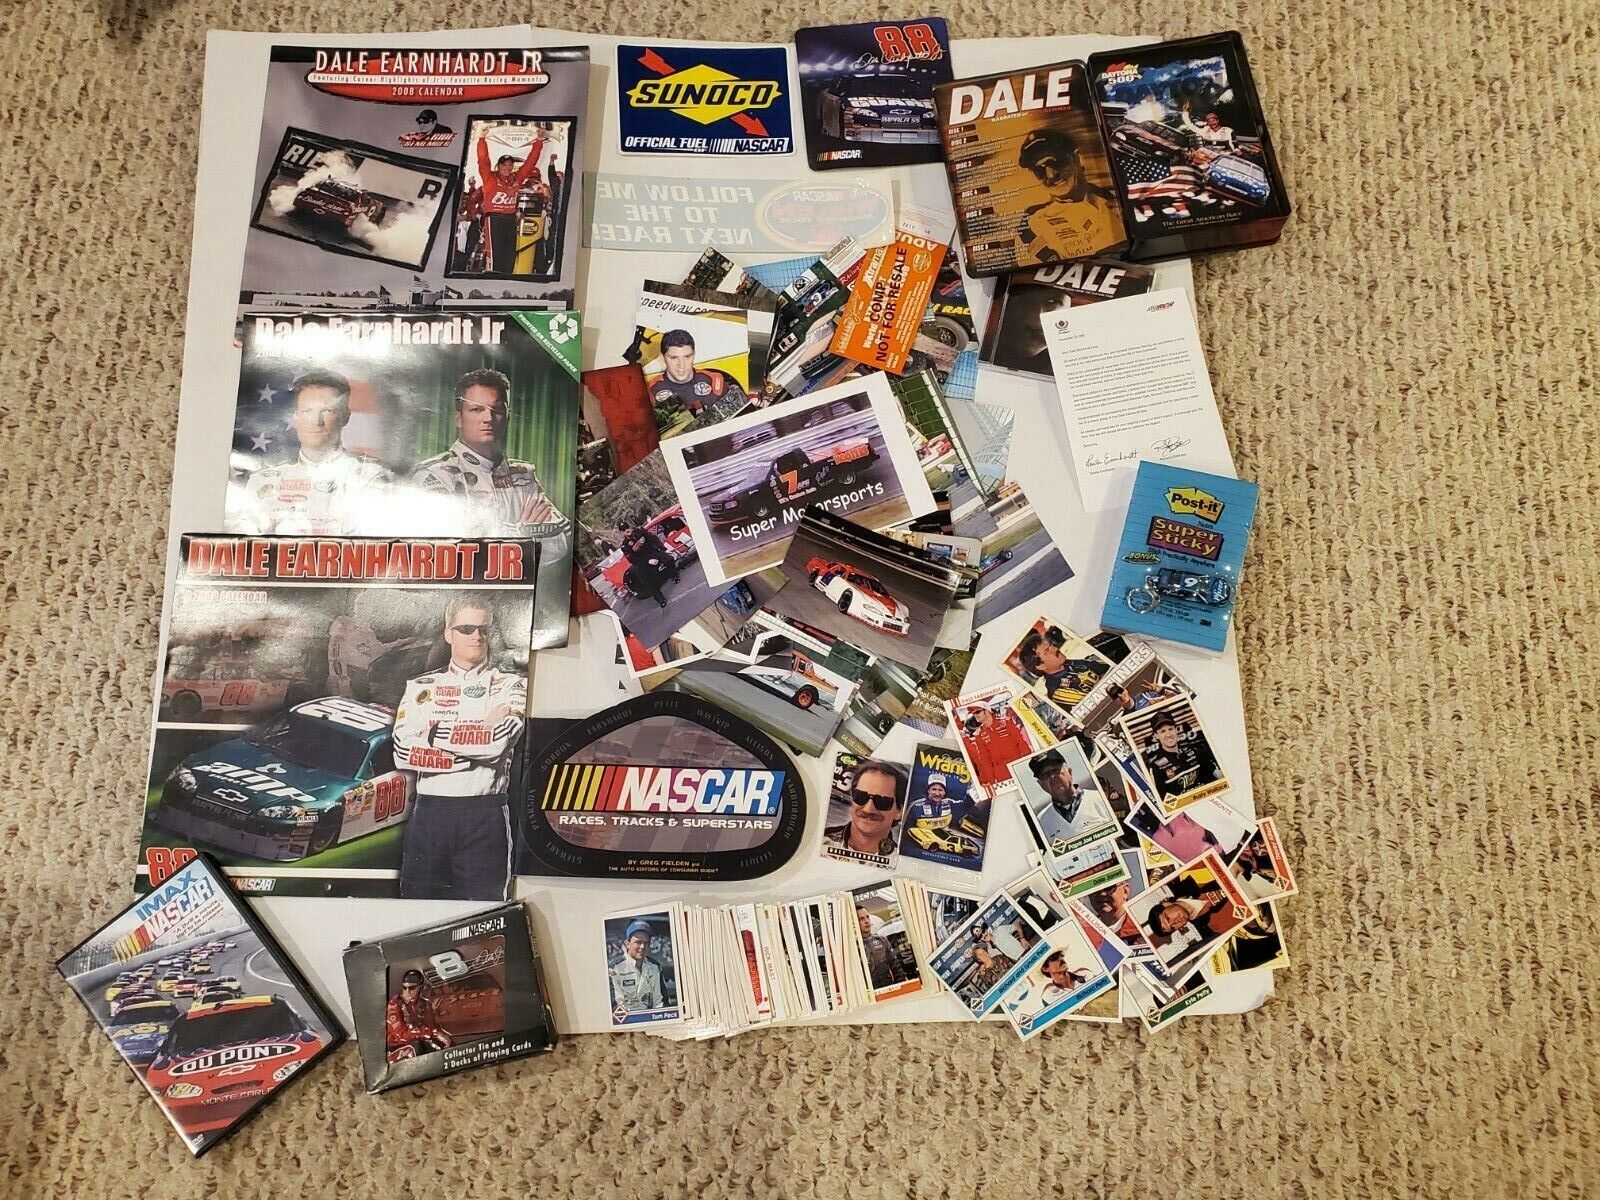 Nascar Junk Drawer Lot - Dale Earnhardt DVD, cards, photos, Calenders, stickers